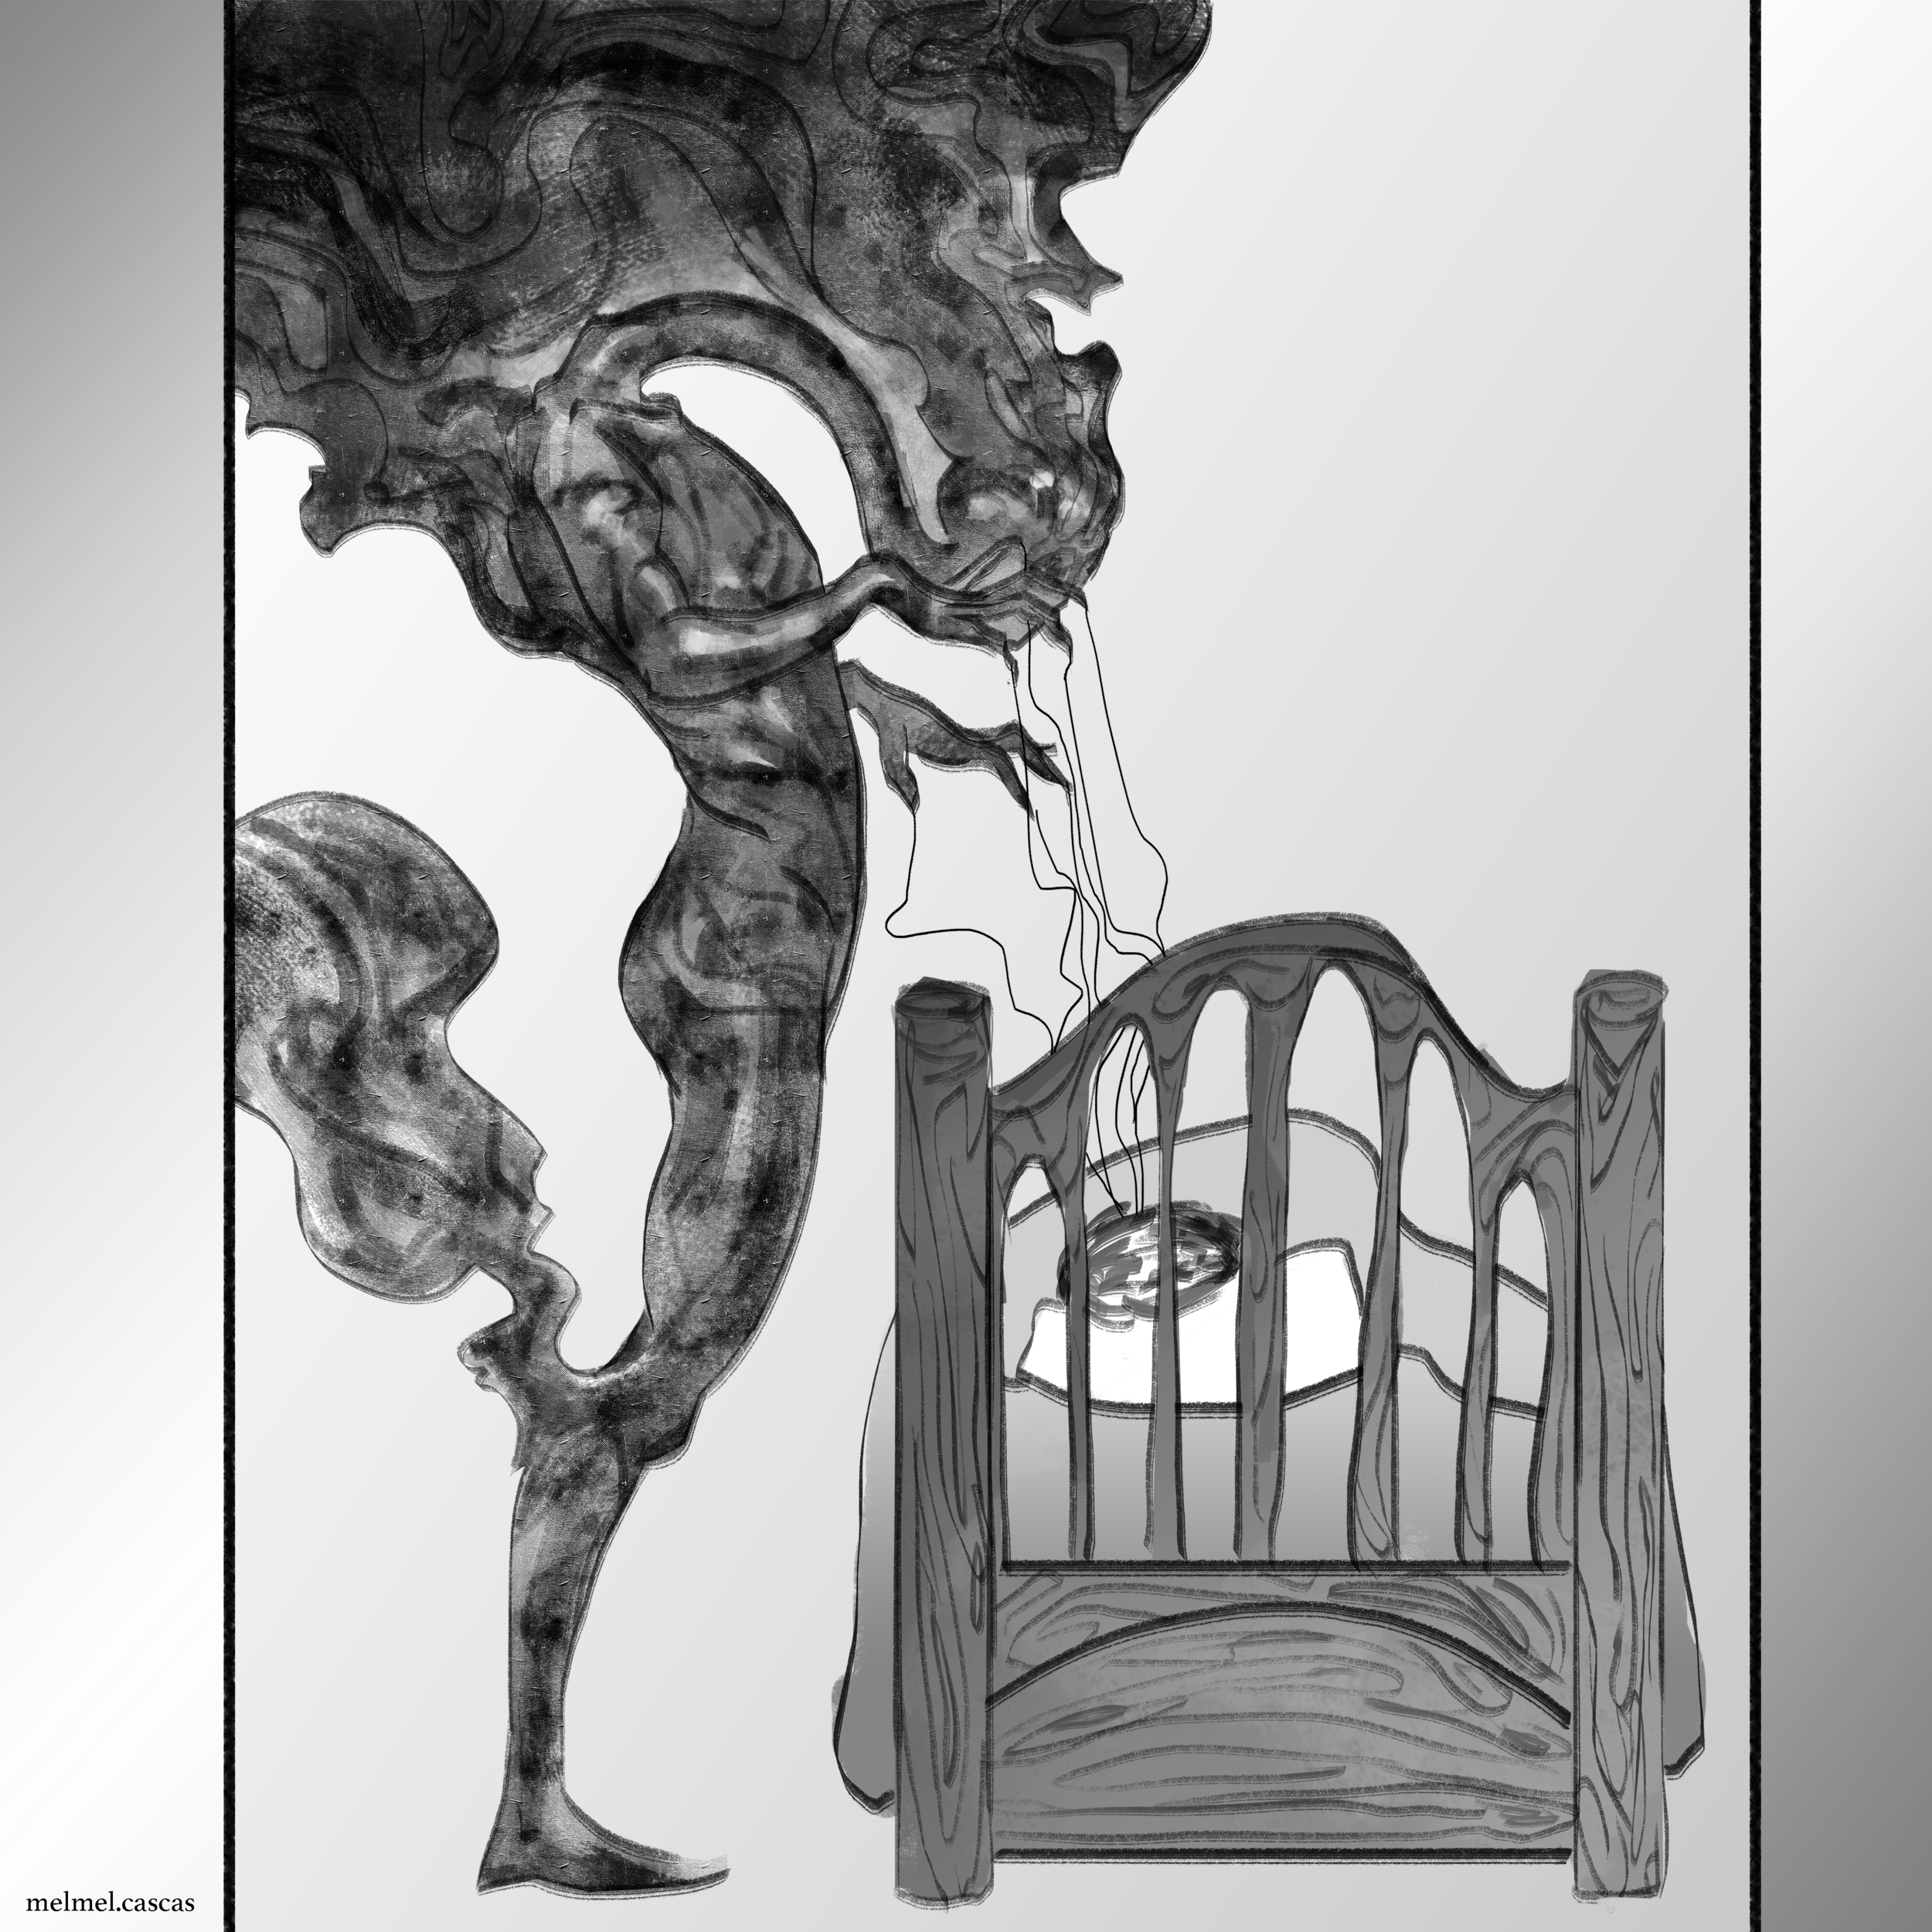 sleep paralysis monster stading over a bed